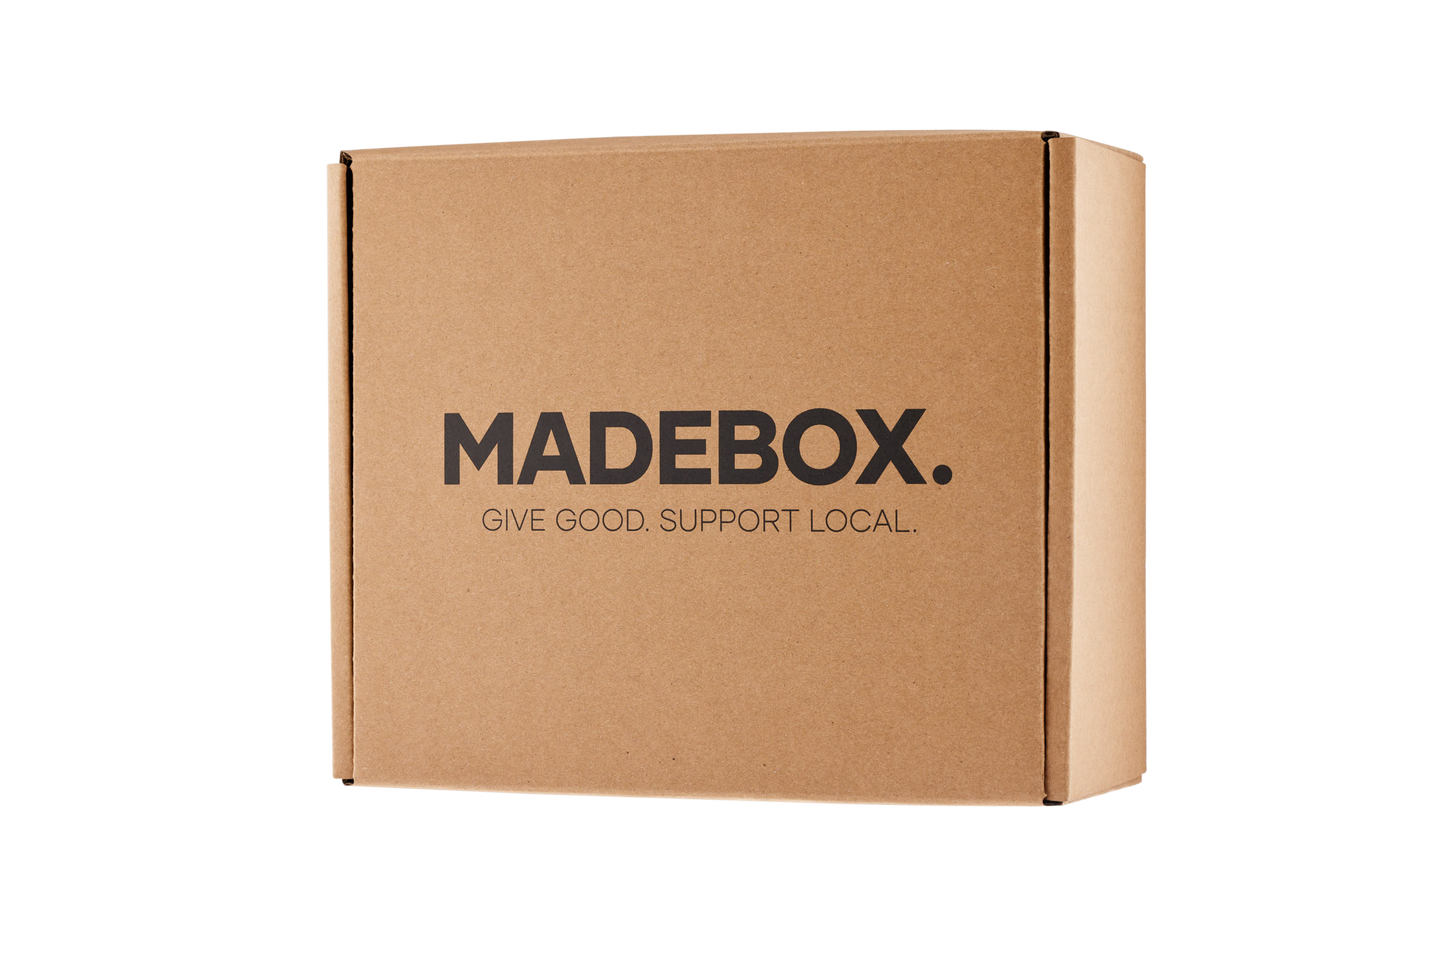 The Finders Keepers X Madebox Flavour Finds Box